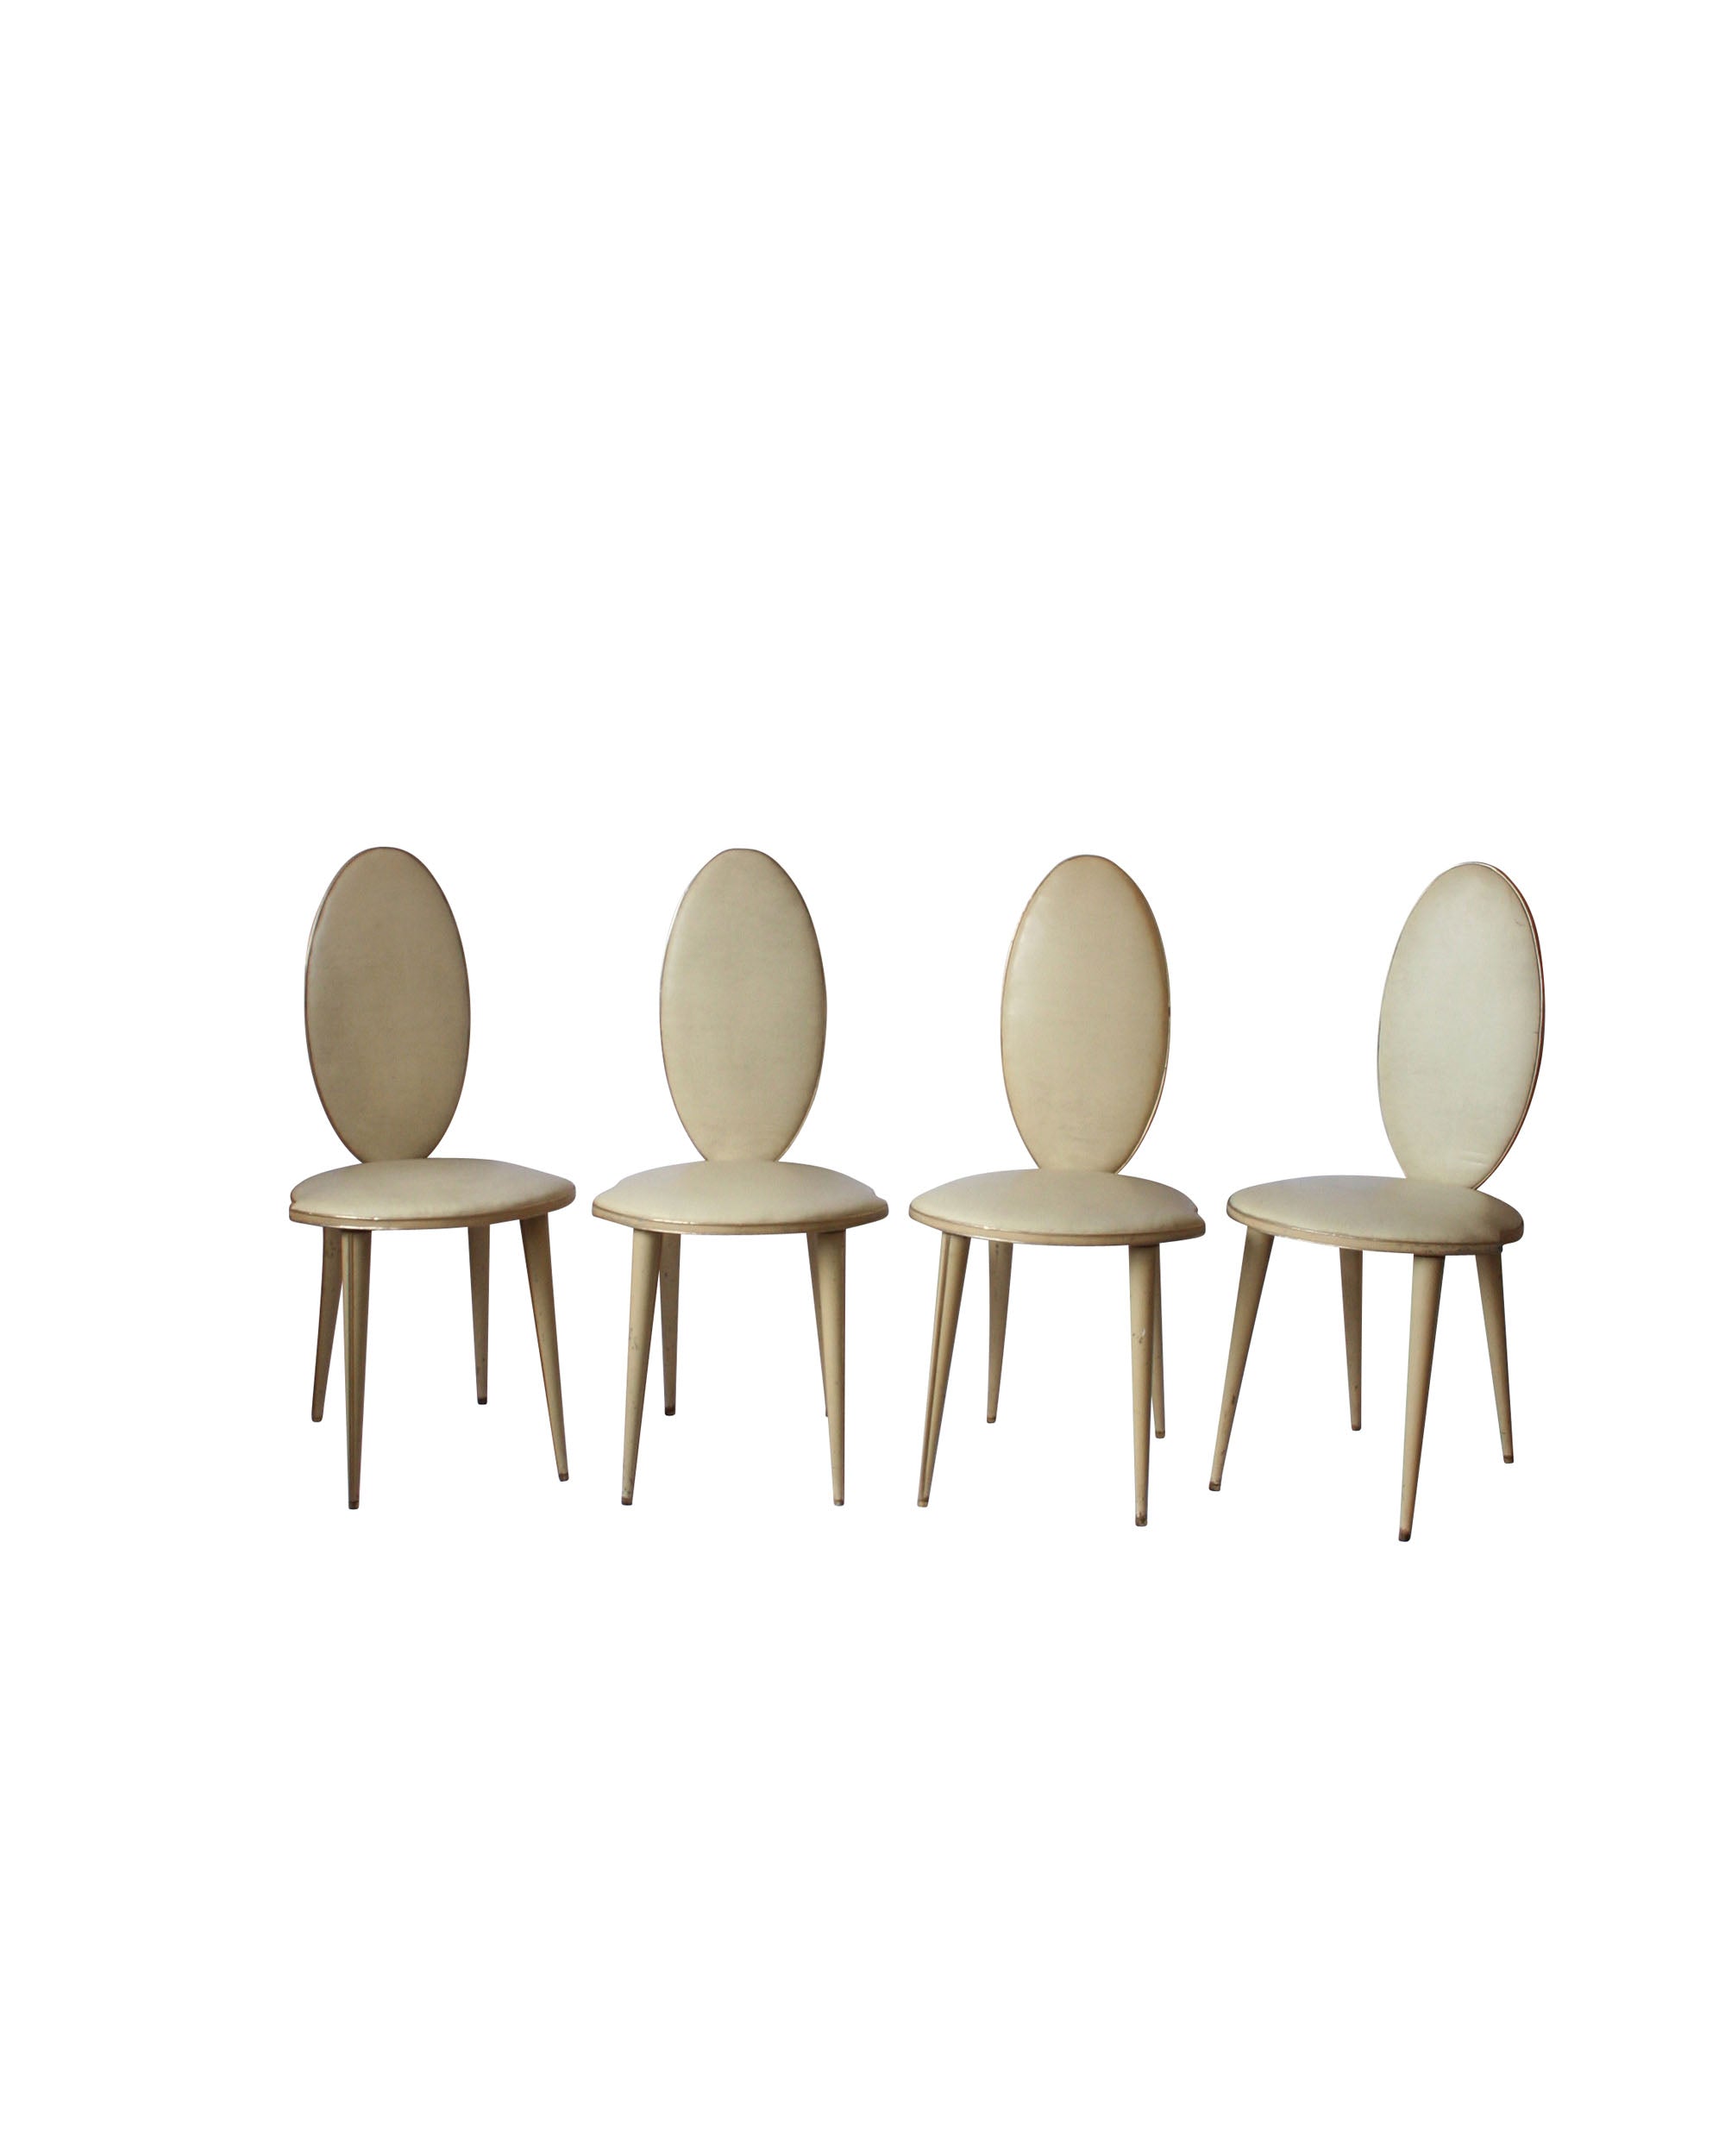 Set of six mid-century chairs with backrest in an oval shape. Italy. 1950